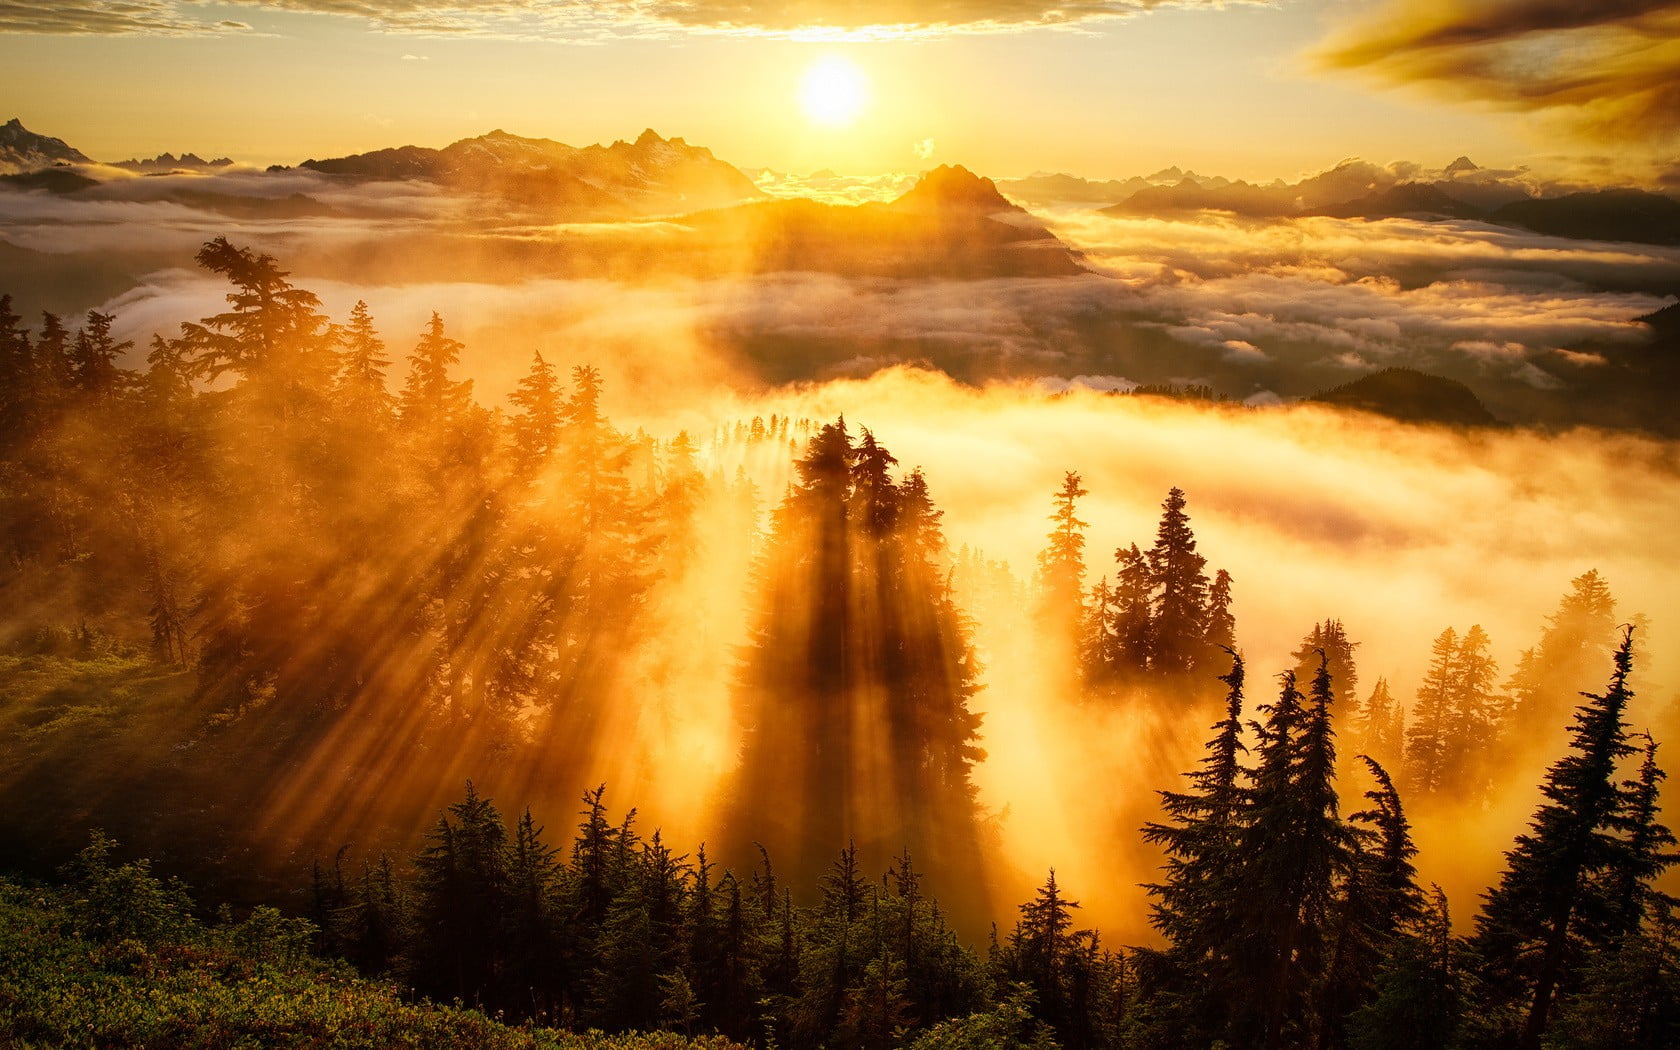 mountains with fogs, nature, landscape, mountains, sunlight